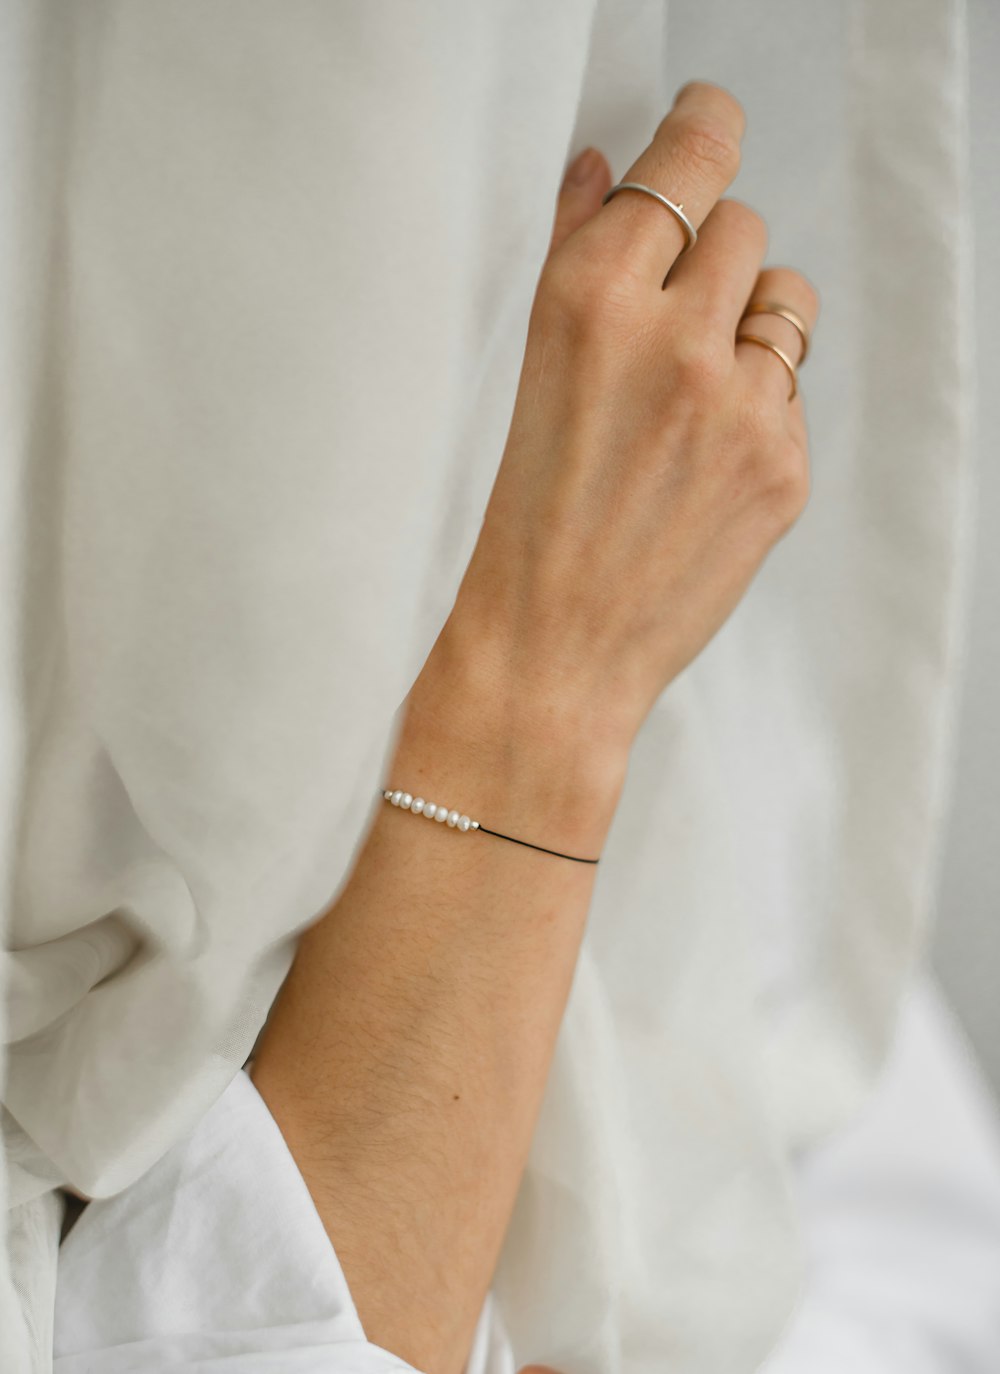 person wearing silver bracelet and white dress shirt